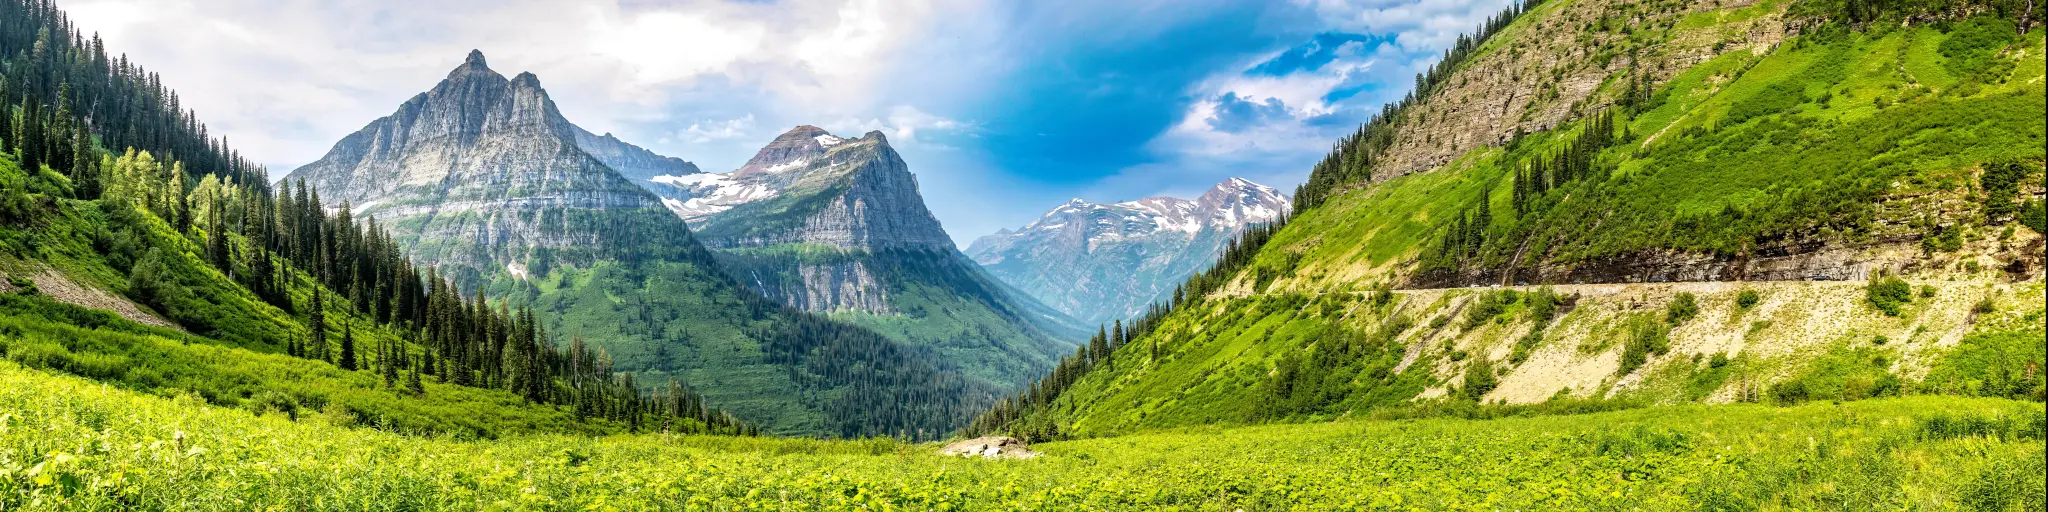 Glacier National Park, Montana, USA a majestic view over the park with green foliage in the foreground and the stunning mountains in the distance on a sunny day.